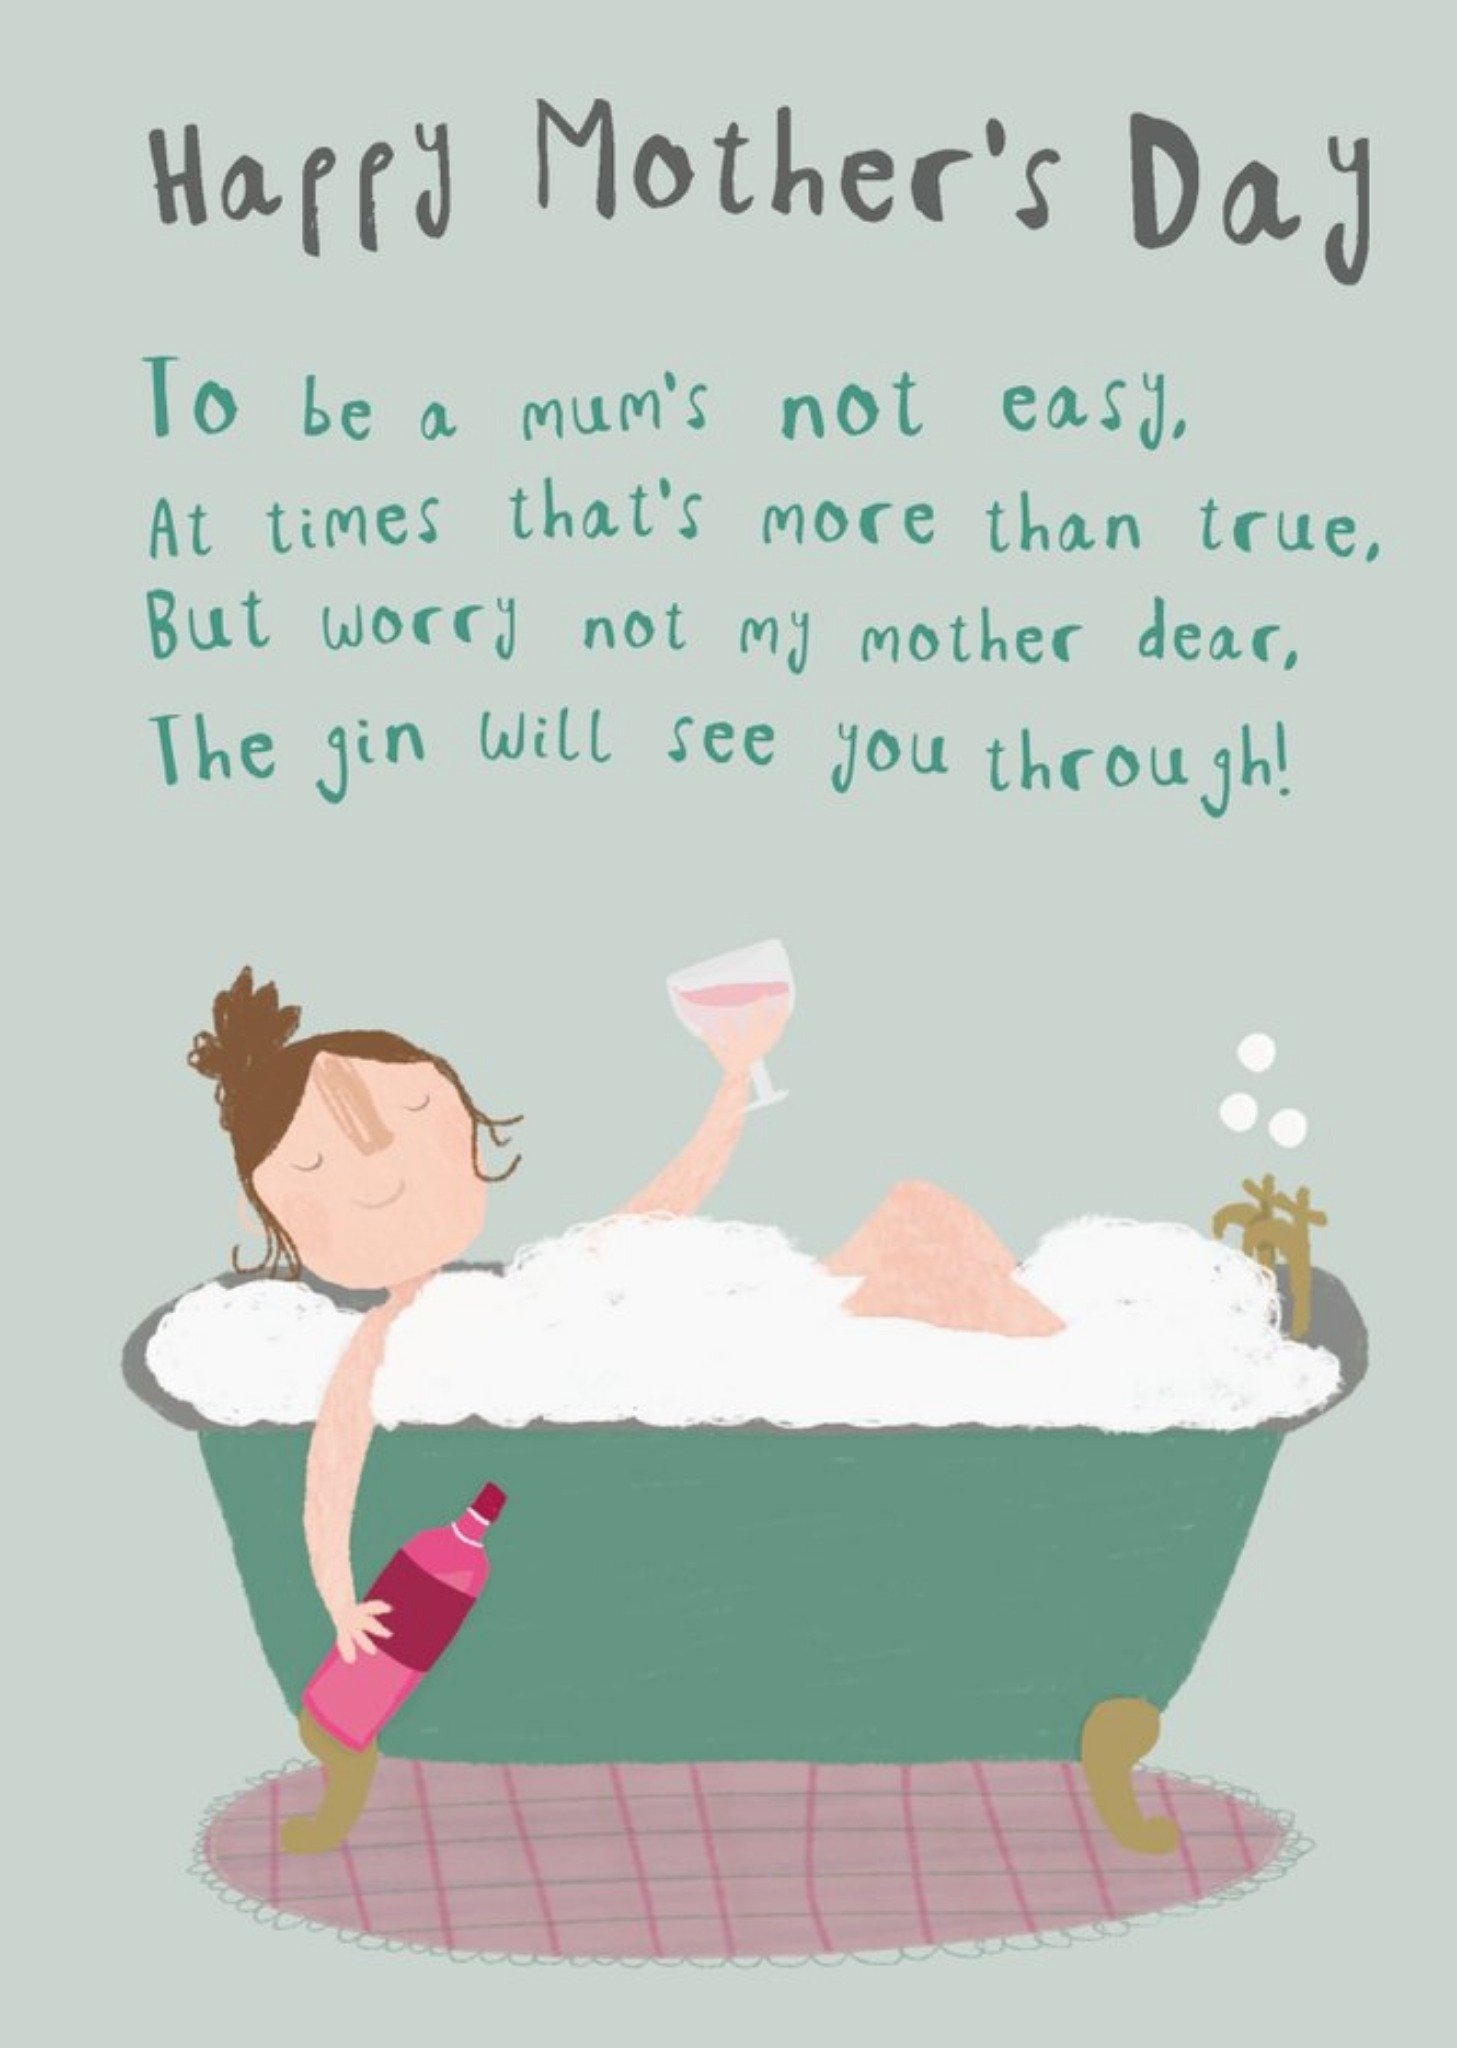 Moonpig Illustration Of A Lady Drinking Gin While Enjoying A Bubble Bath Humourous Mother's Day Card